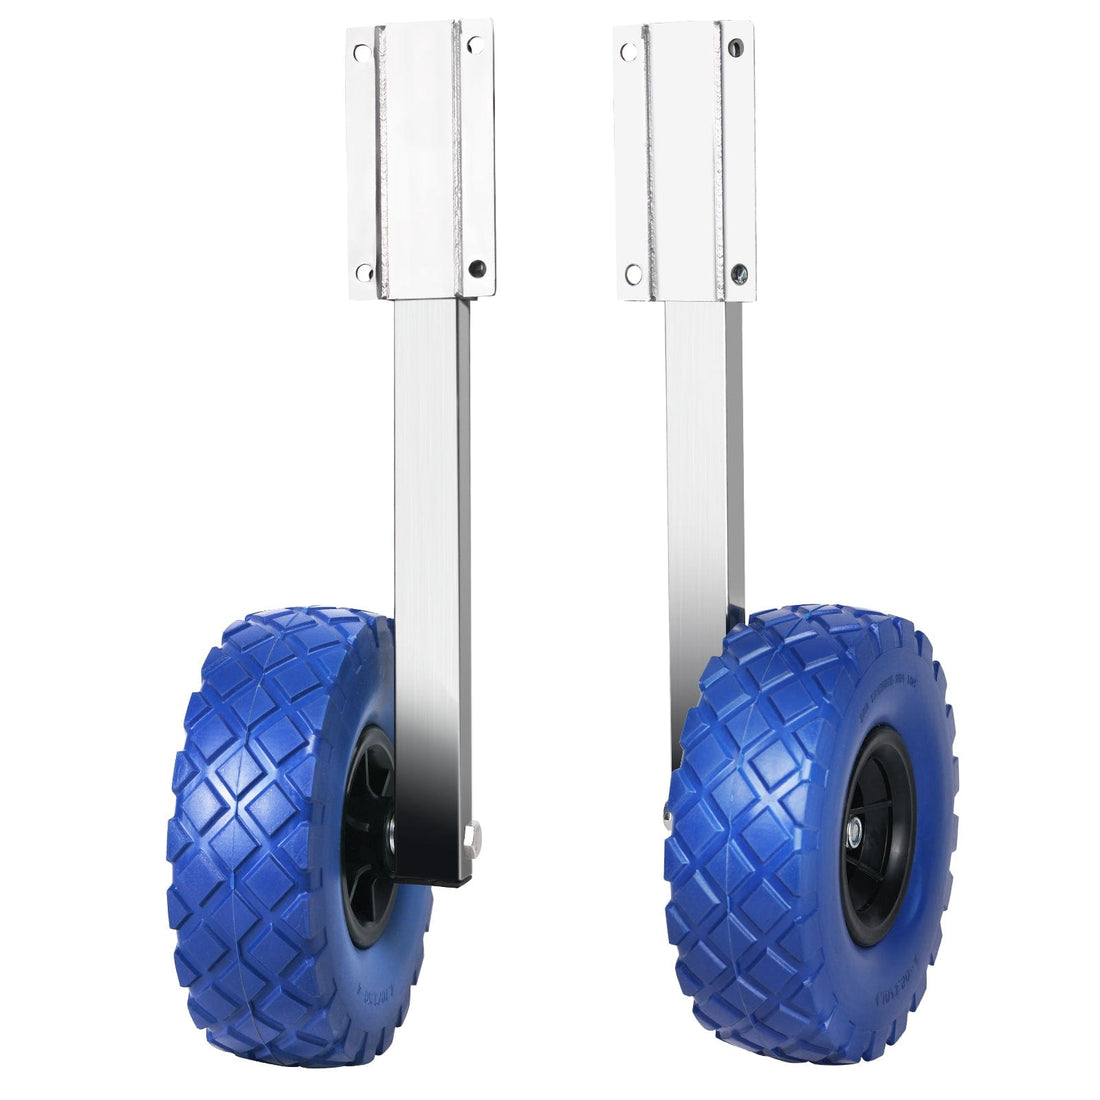 Launching Wheels 300LBS Boat Stainless Steel Transom Launching Wheel Dolly With 10 Inch Wheel Set